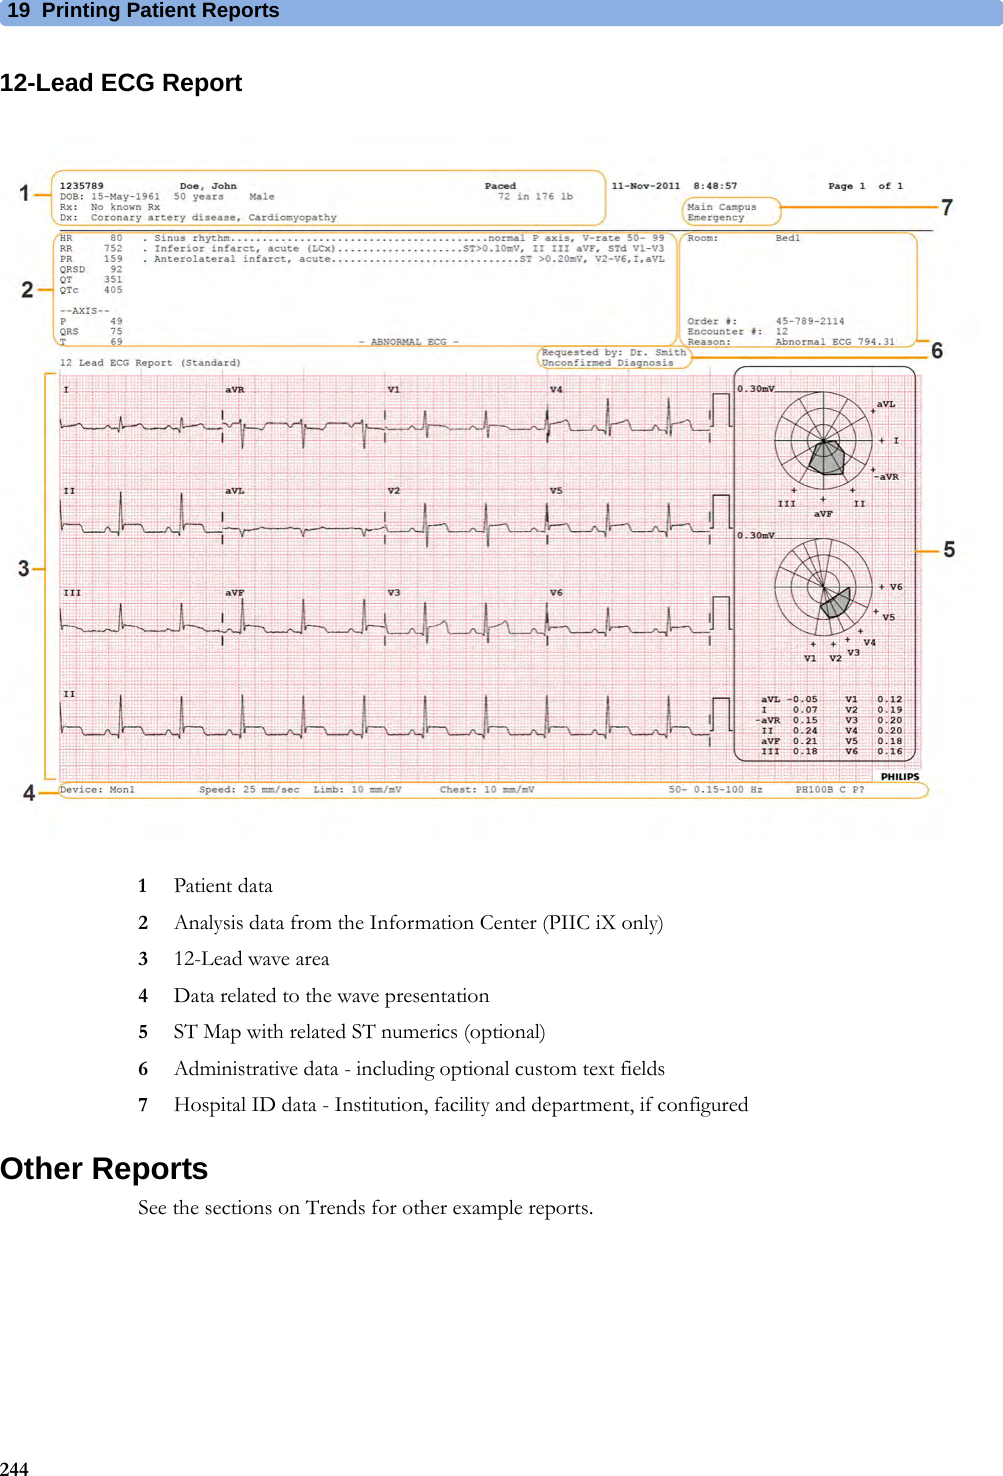 19 Printing Patient Reports24412-Lead ECG Report1Patient data2Analysis data from the Information Center (PIIC iX only)312-Lead wave area4Data related to the wave presentation5ST Map with related ST numerics (optional)6Administrative data - including optional custom text fields7Hospital ID data - Institution, facility and department, if configuredOther ReportsSee the sections on Trends for other example reports.